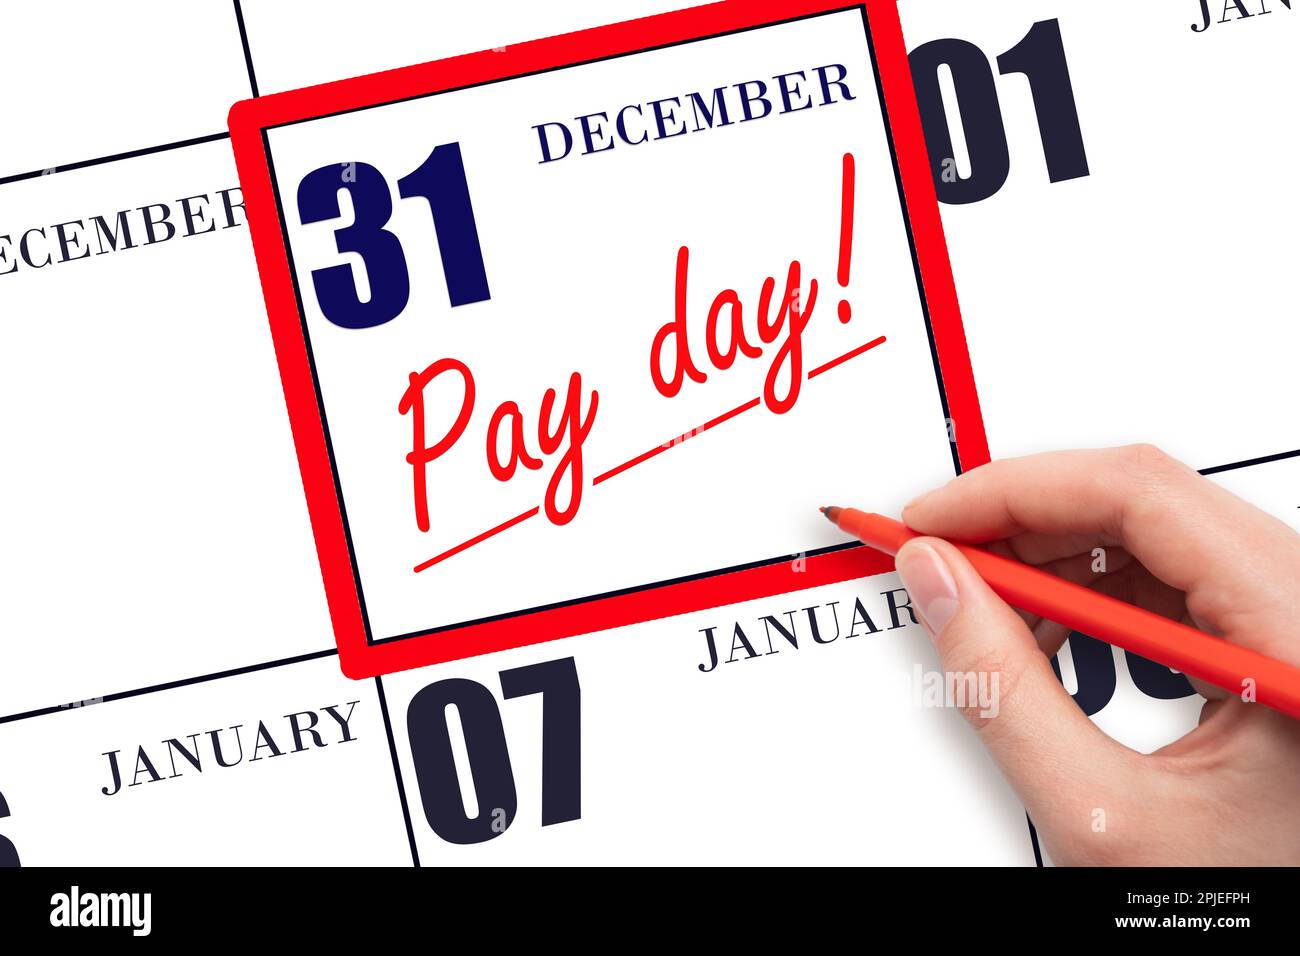 31st day of December. Hand writing text PAY DATE on calendar date December 31 and underline it. Payment due date. Reminder concept of payment. Winter Stock Photo